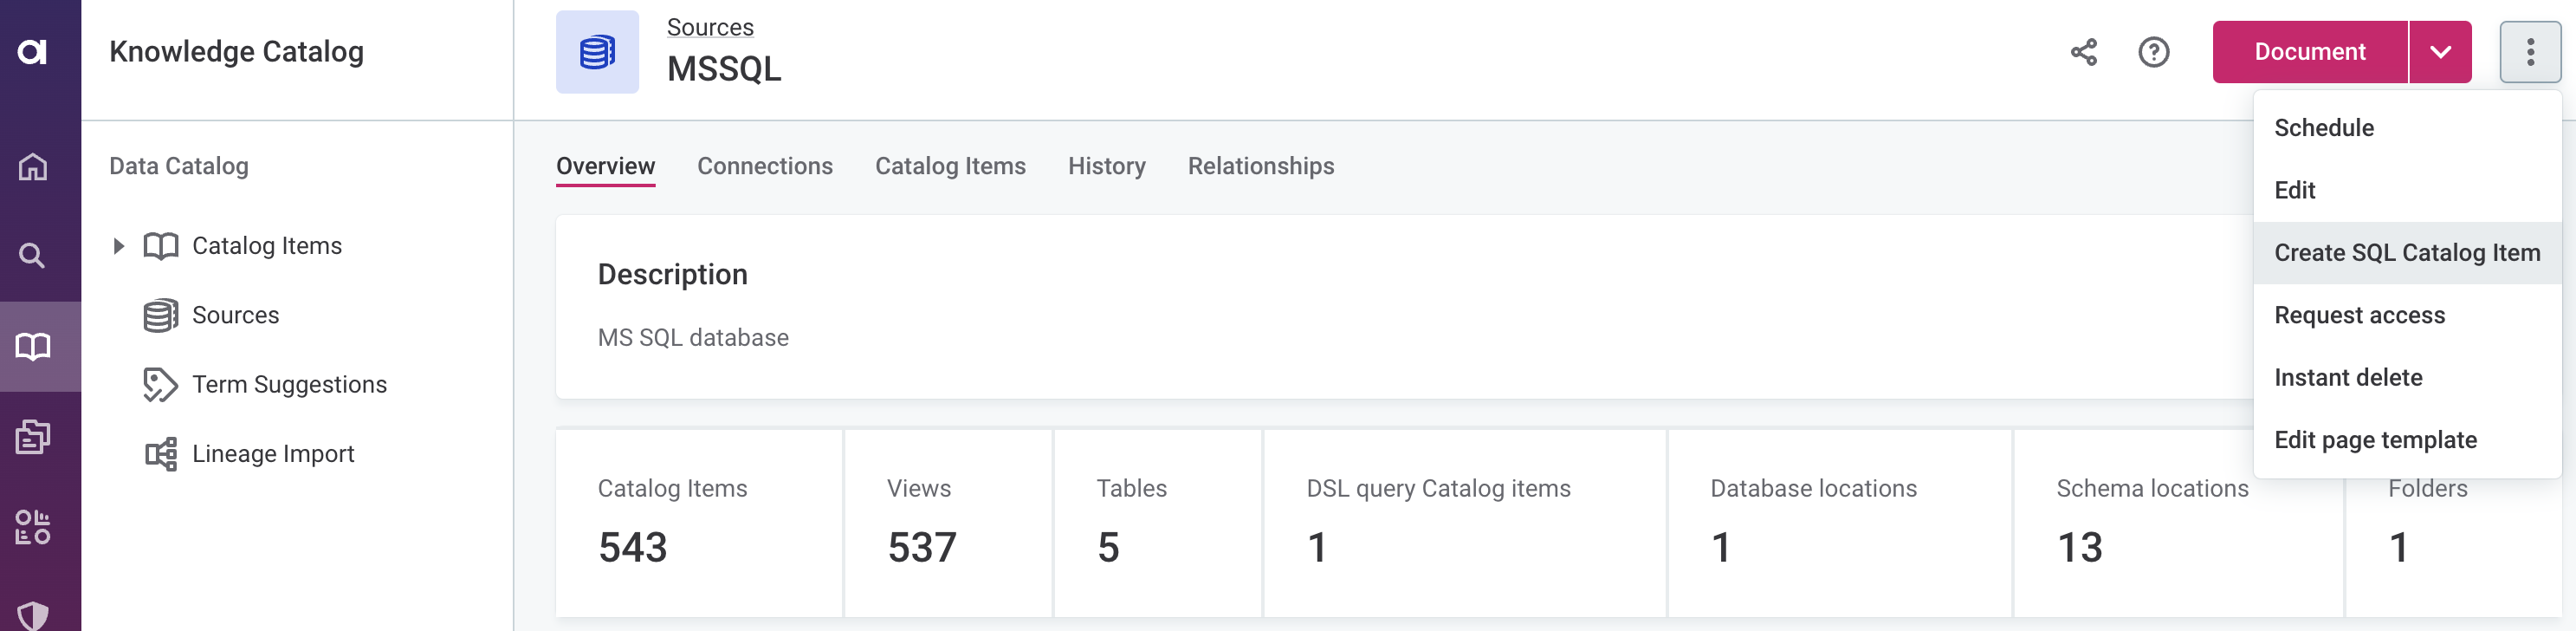 Create SQL catalog item from a source